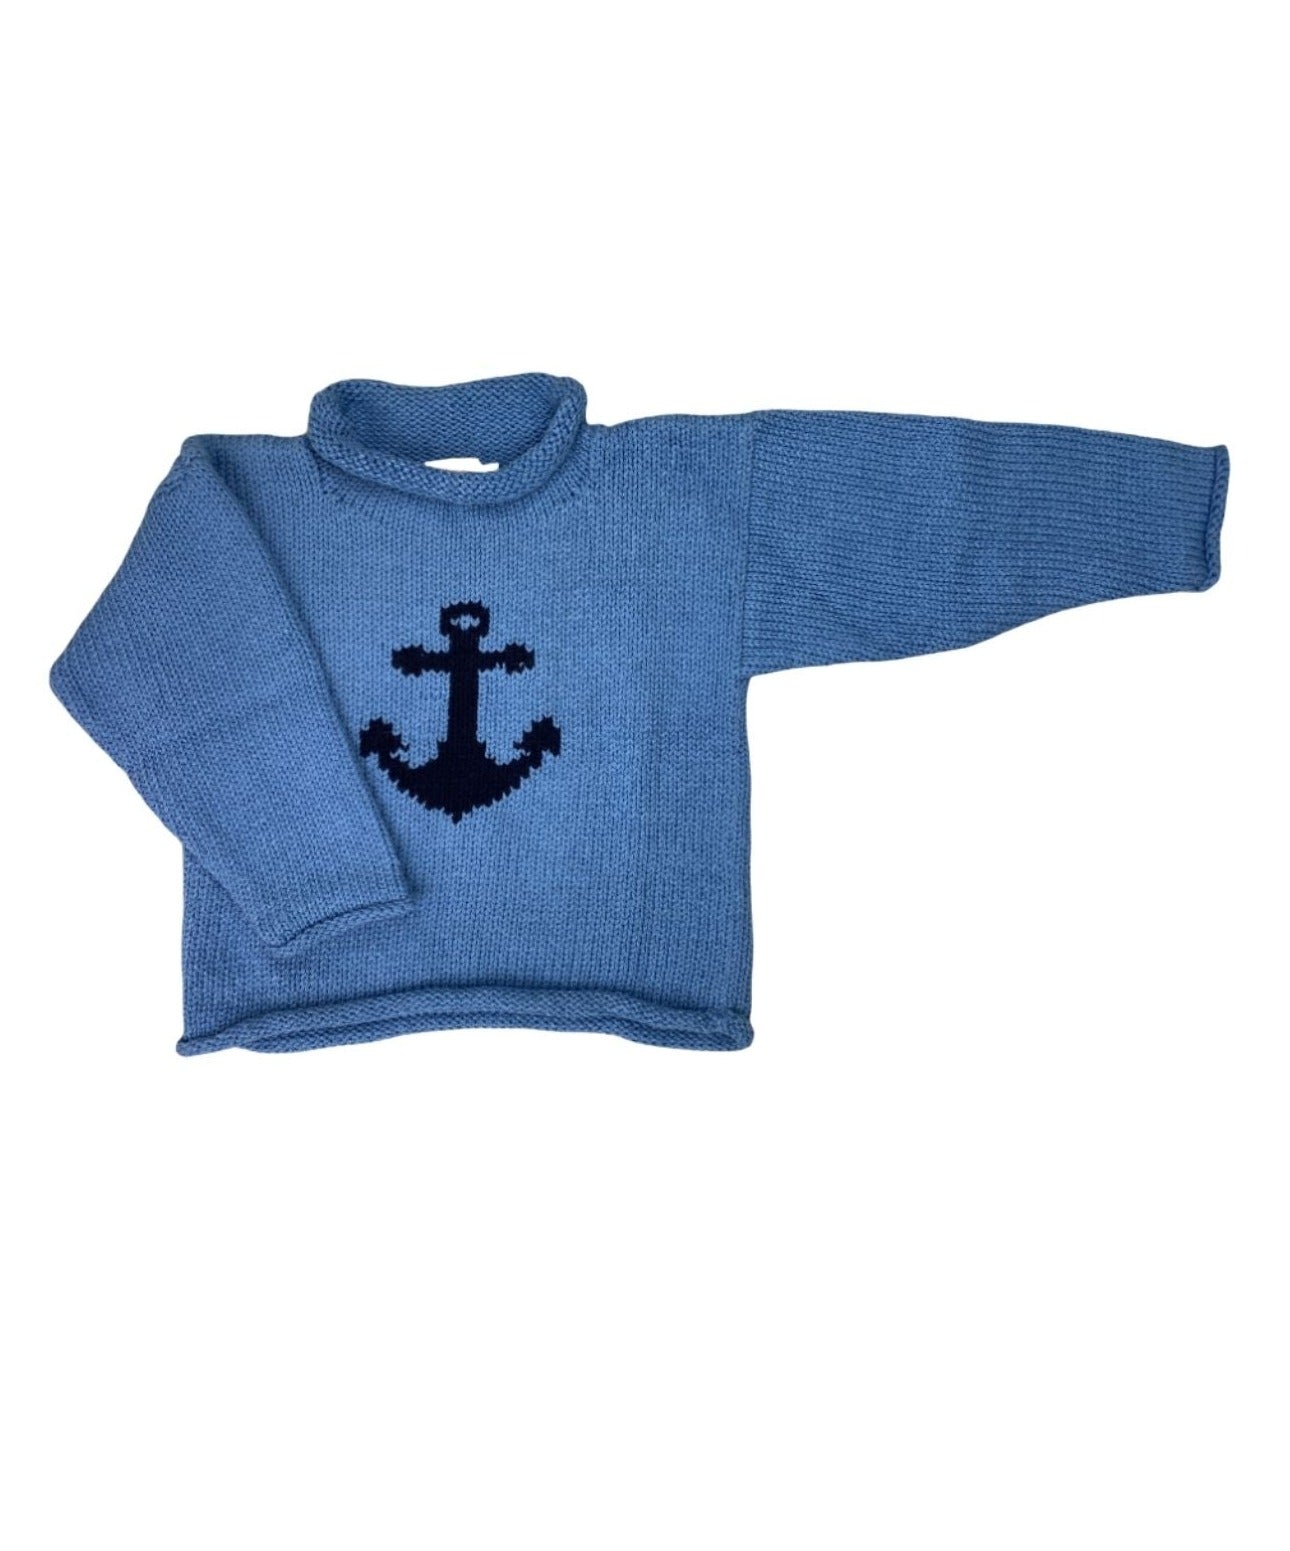 long sleeve light blue cotton sweater with dark navy anchor in center